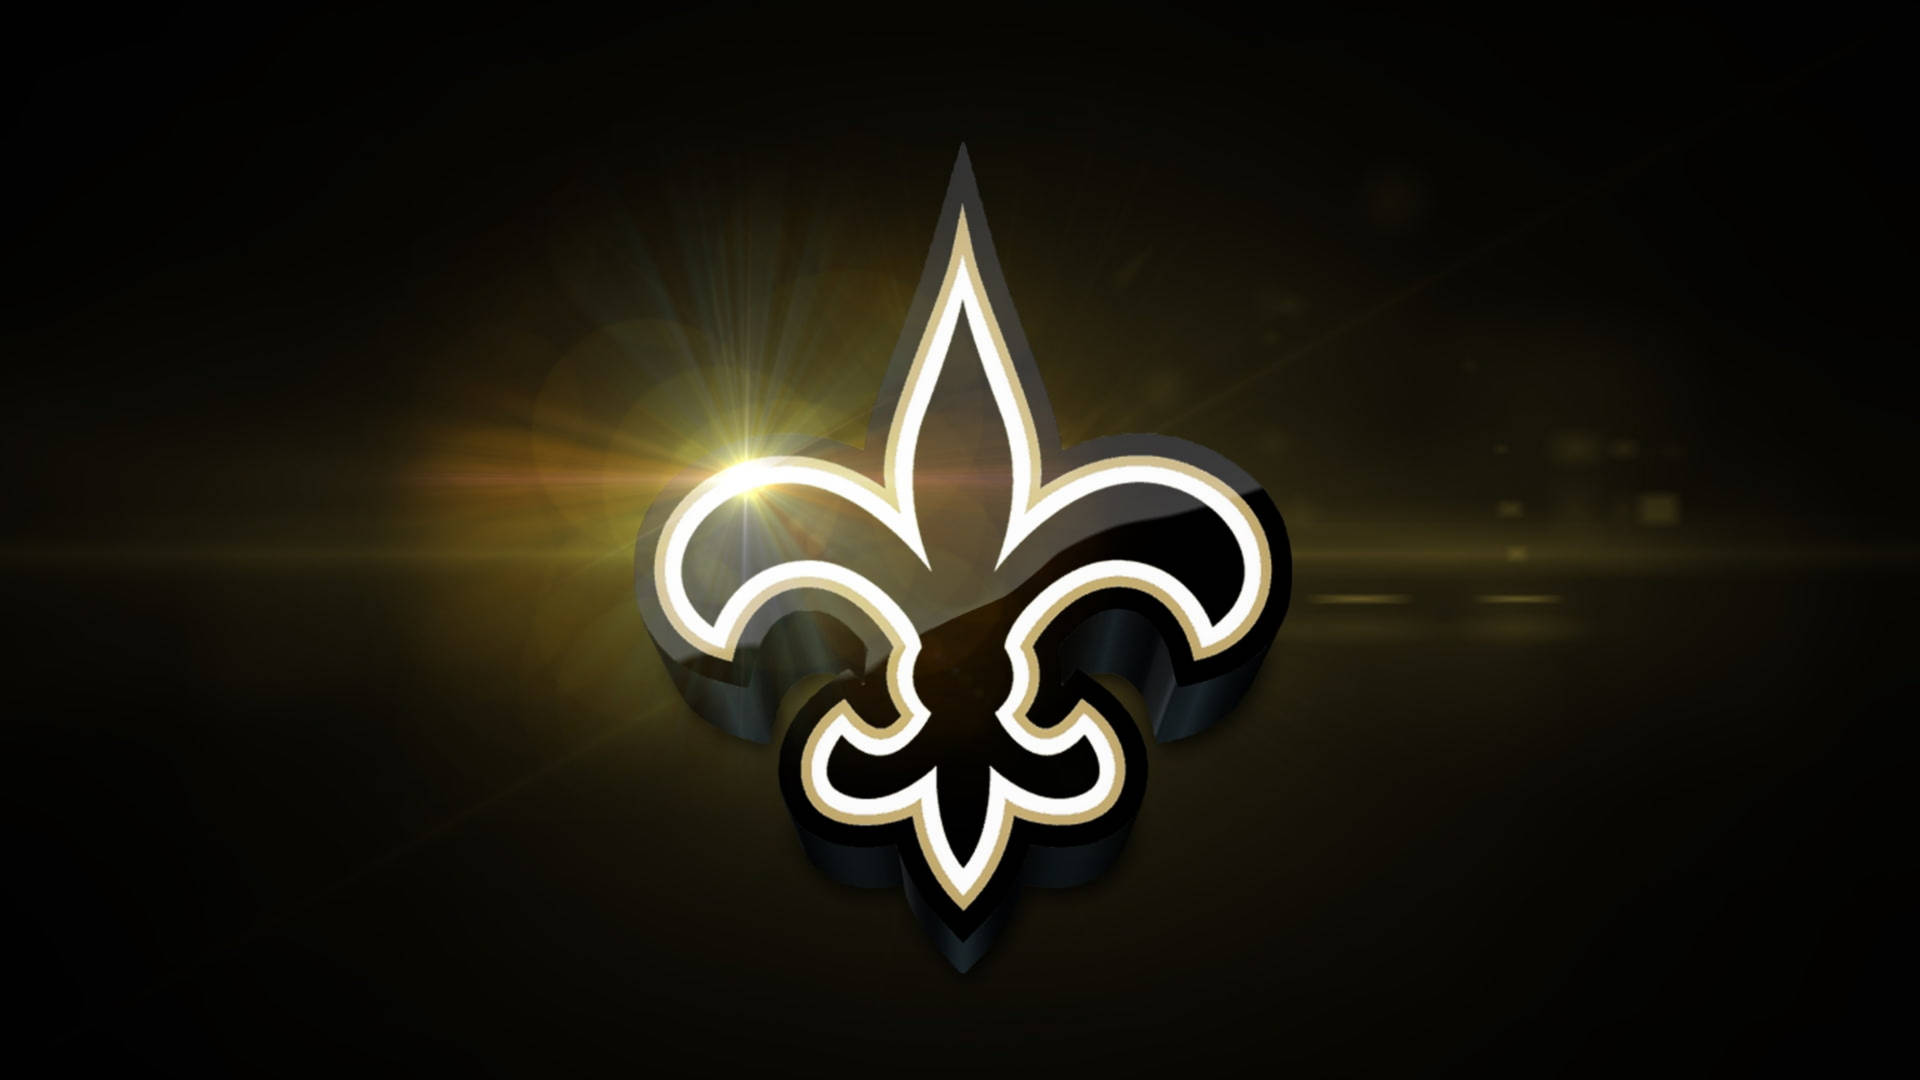 New Orleans Saints In Action! Background